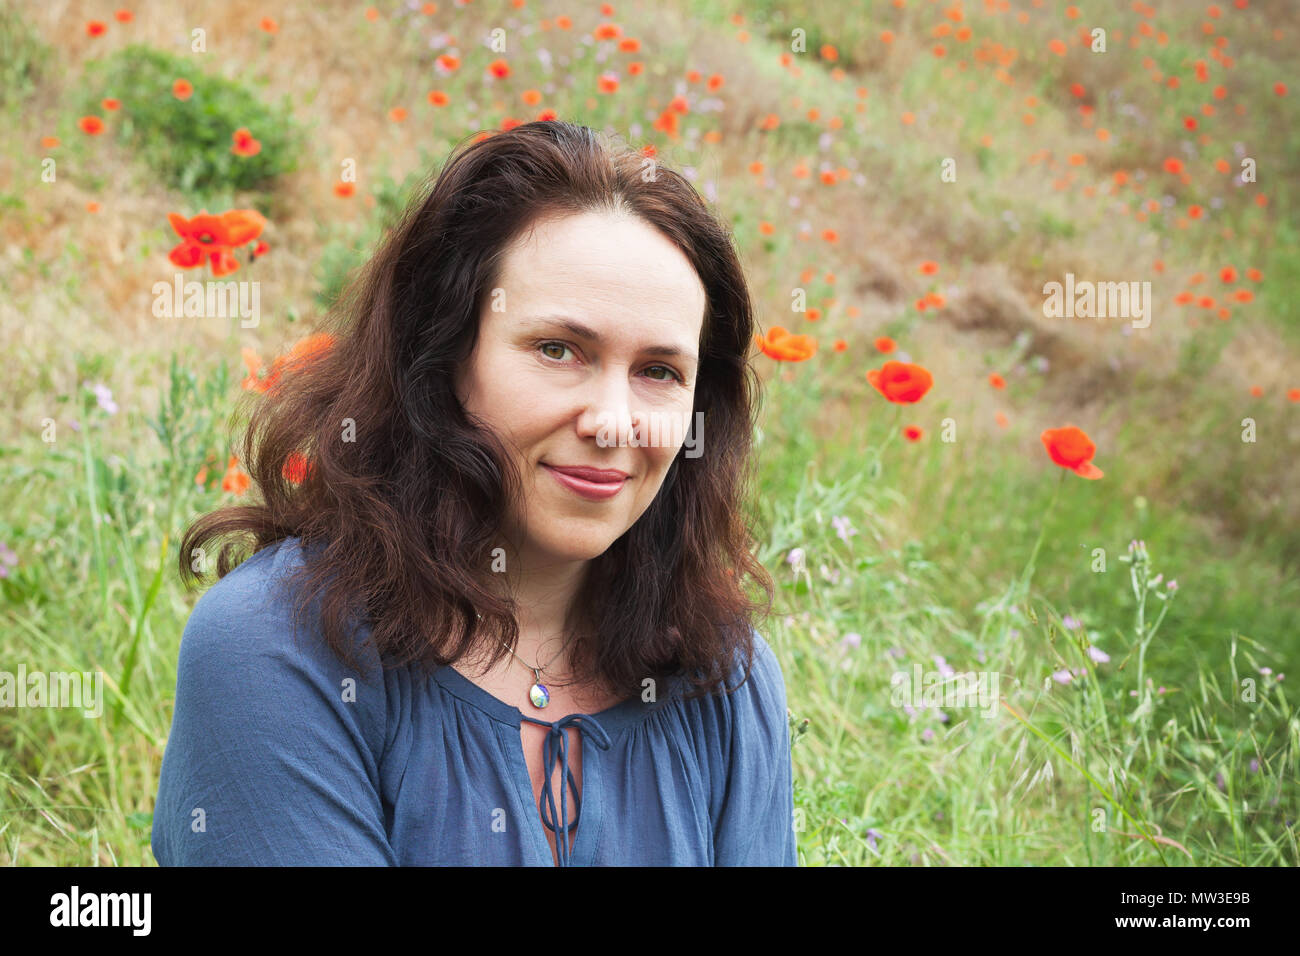 Smiling young adult European woman rests on a summer meadow with flowering poppies. Outdoor portrait Stock Photo